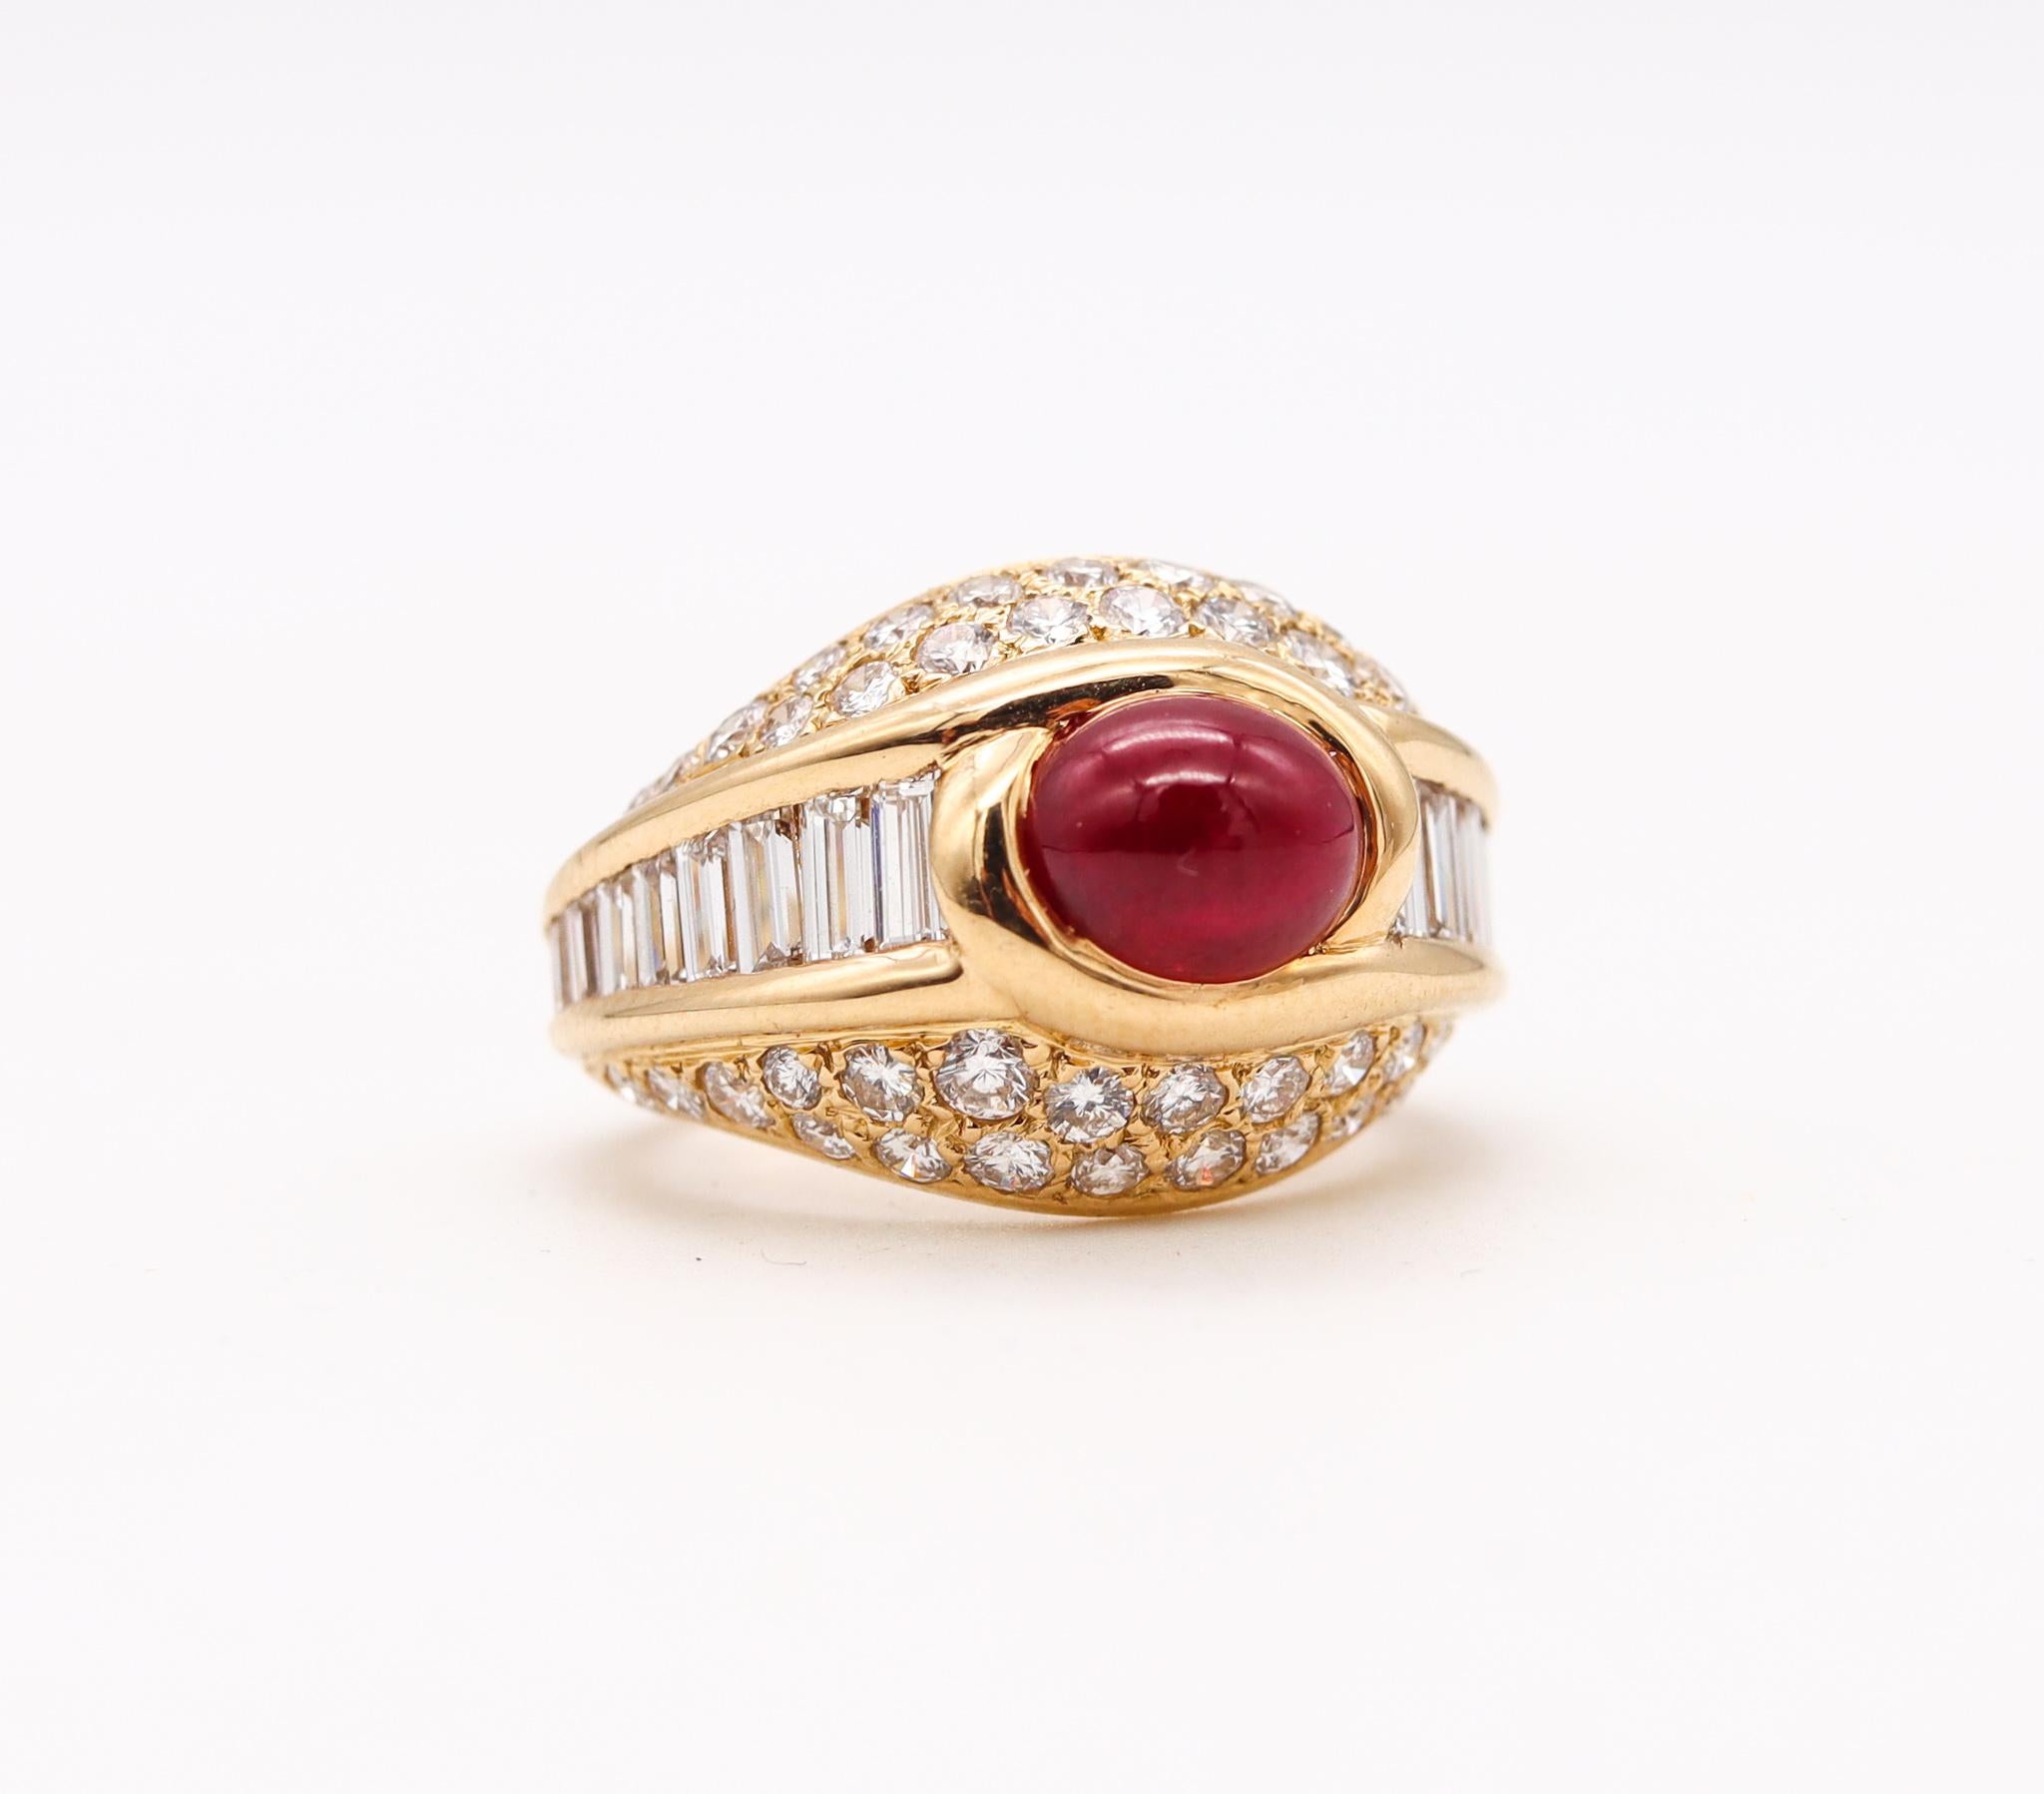 Women's Cartier Paris Cocktail Ring in 18Kt Yellow Gold 4.49 Cts Burmese Ruby Diamonds